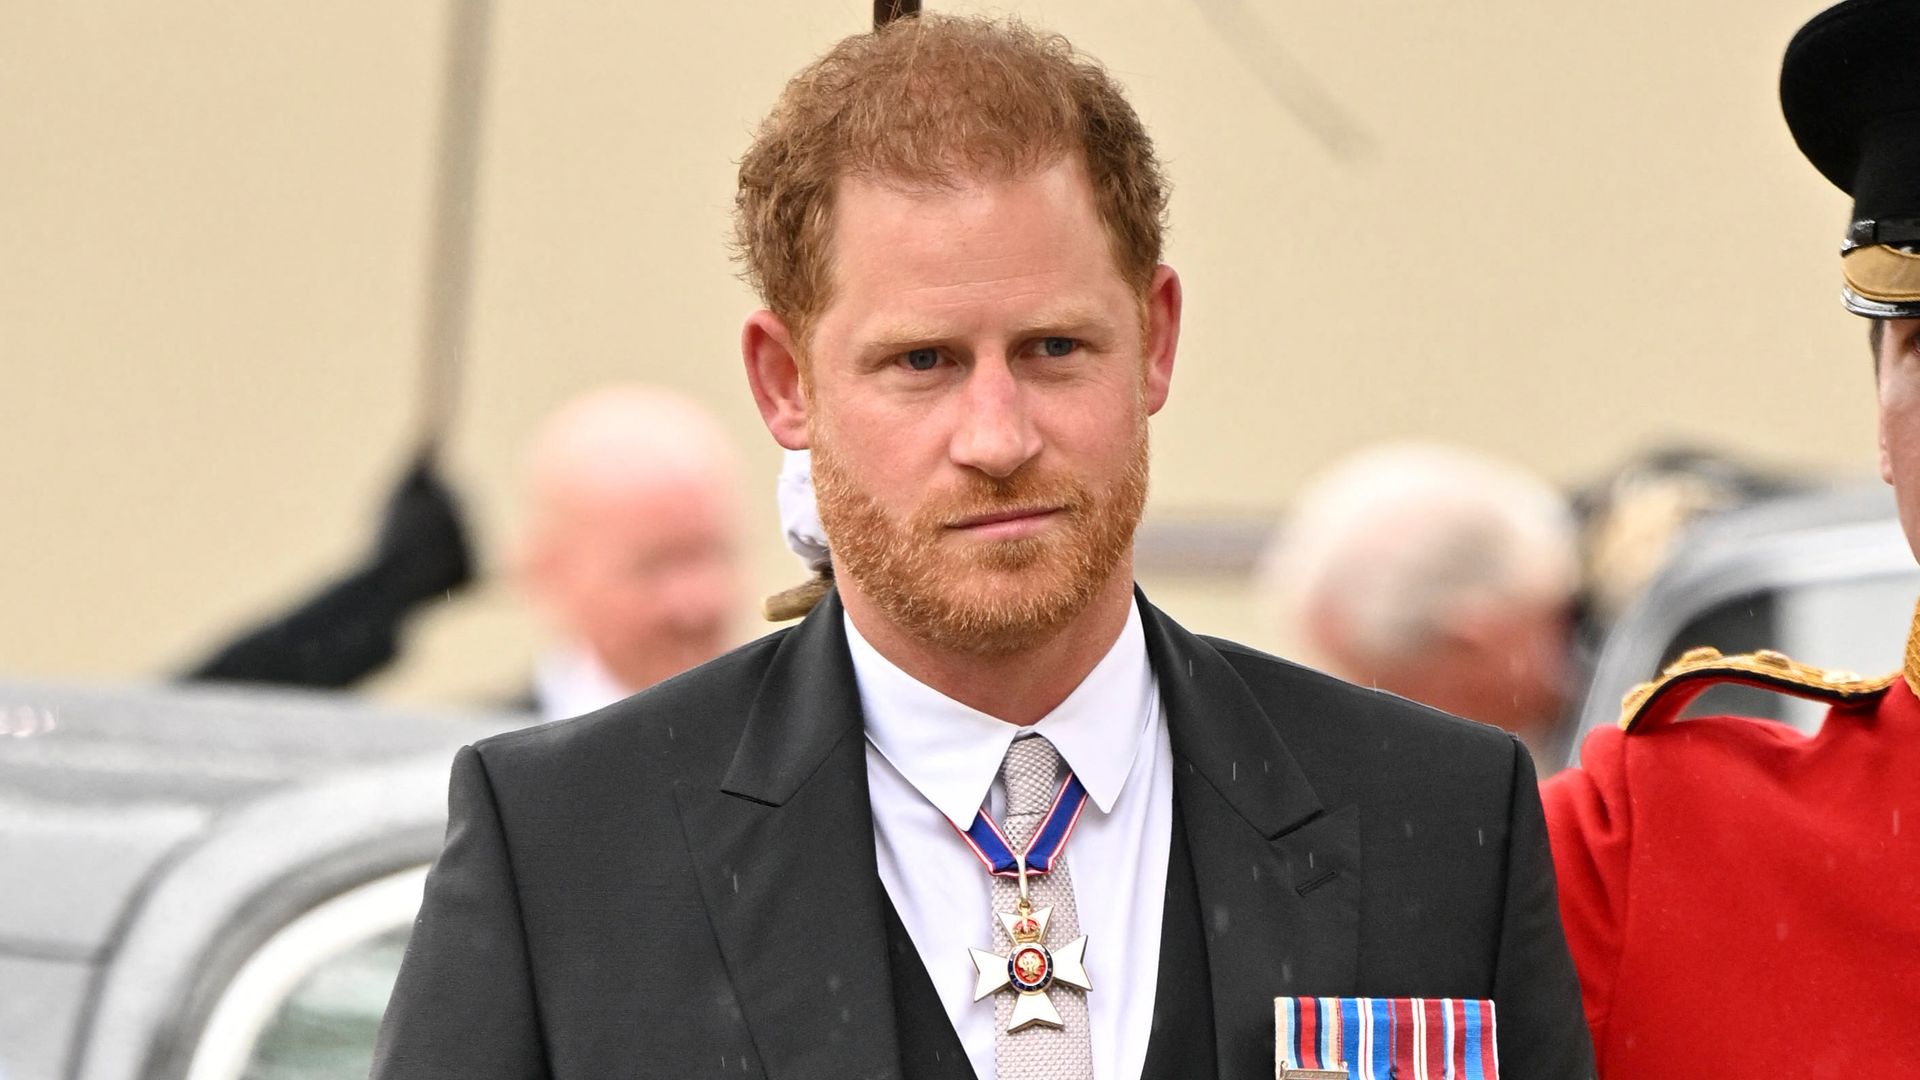 Prince Harry wore a morning suit to the occasion